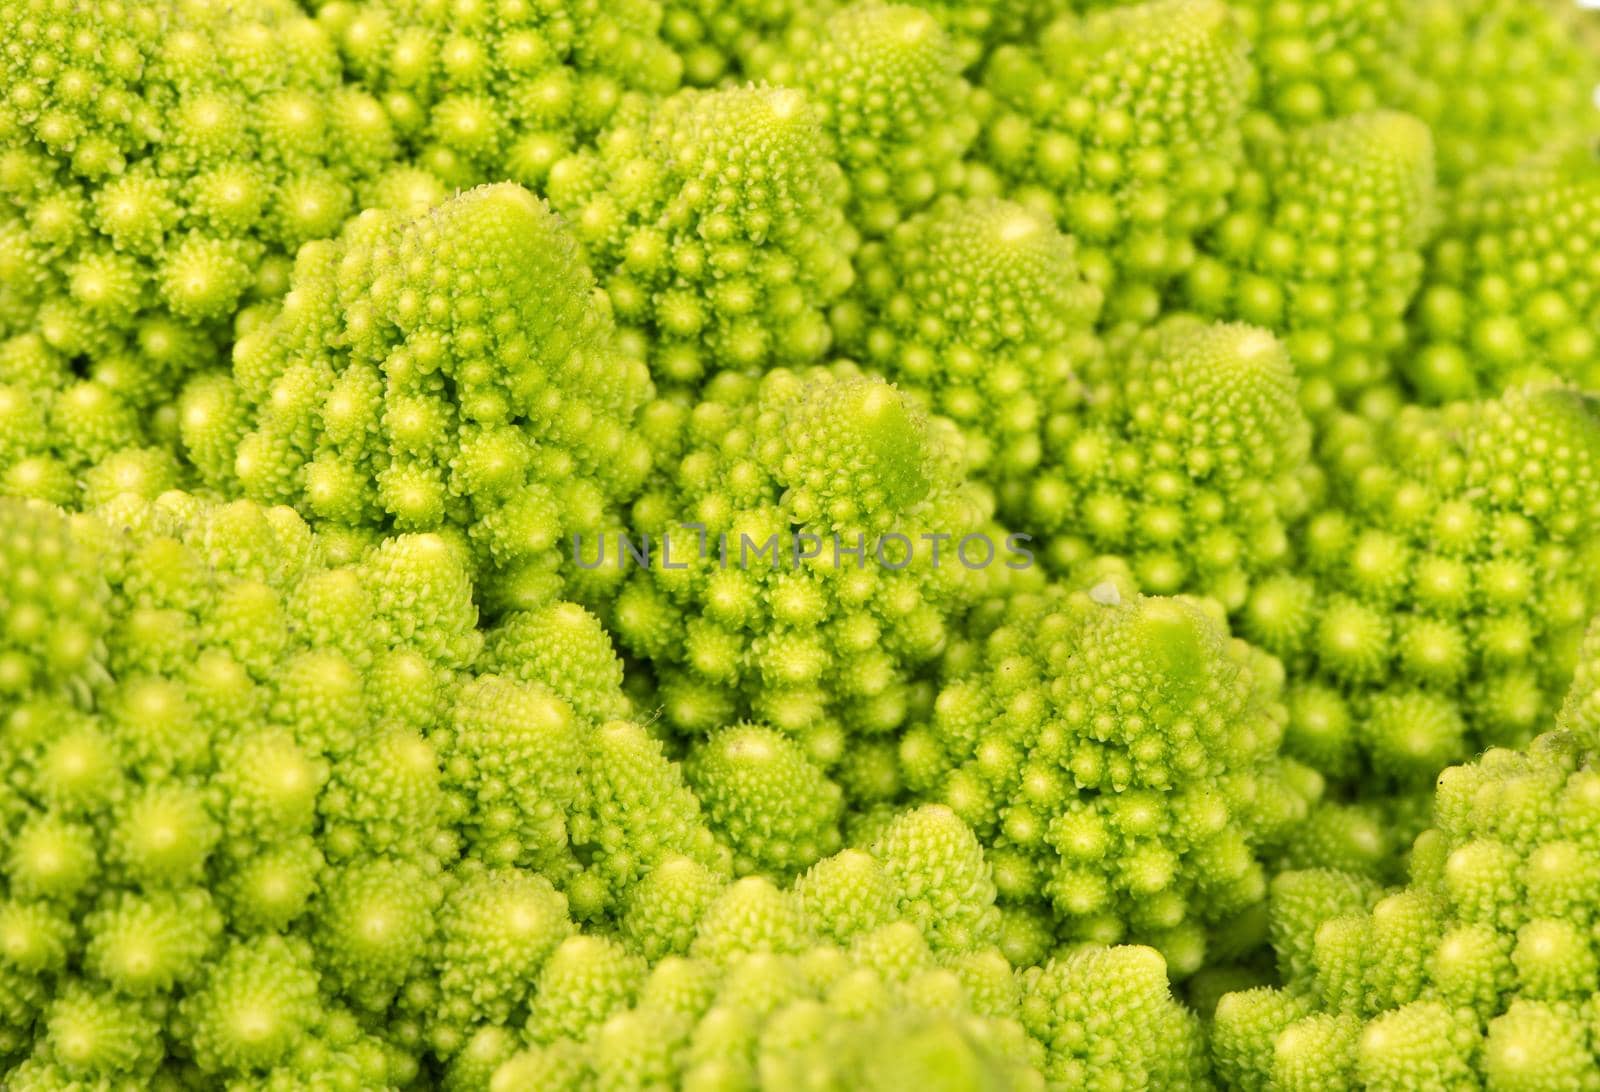 Cabbage romanesco by andregric